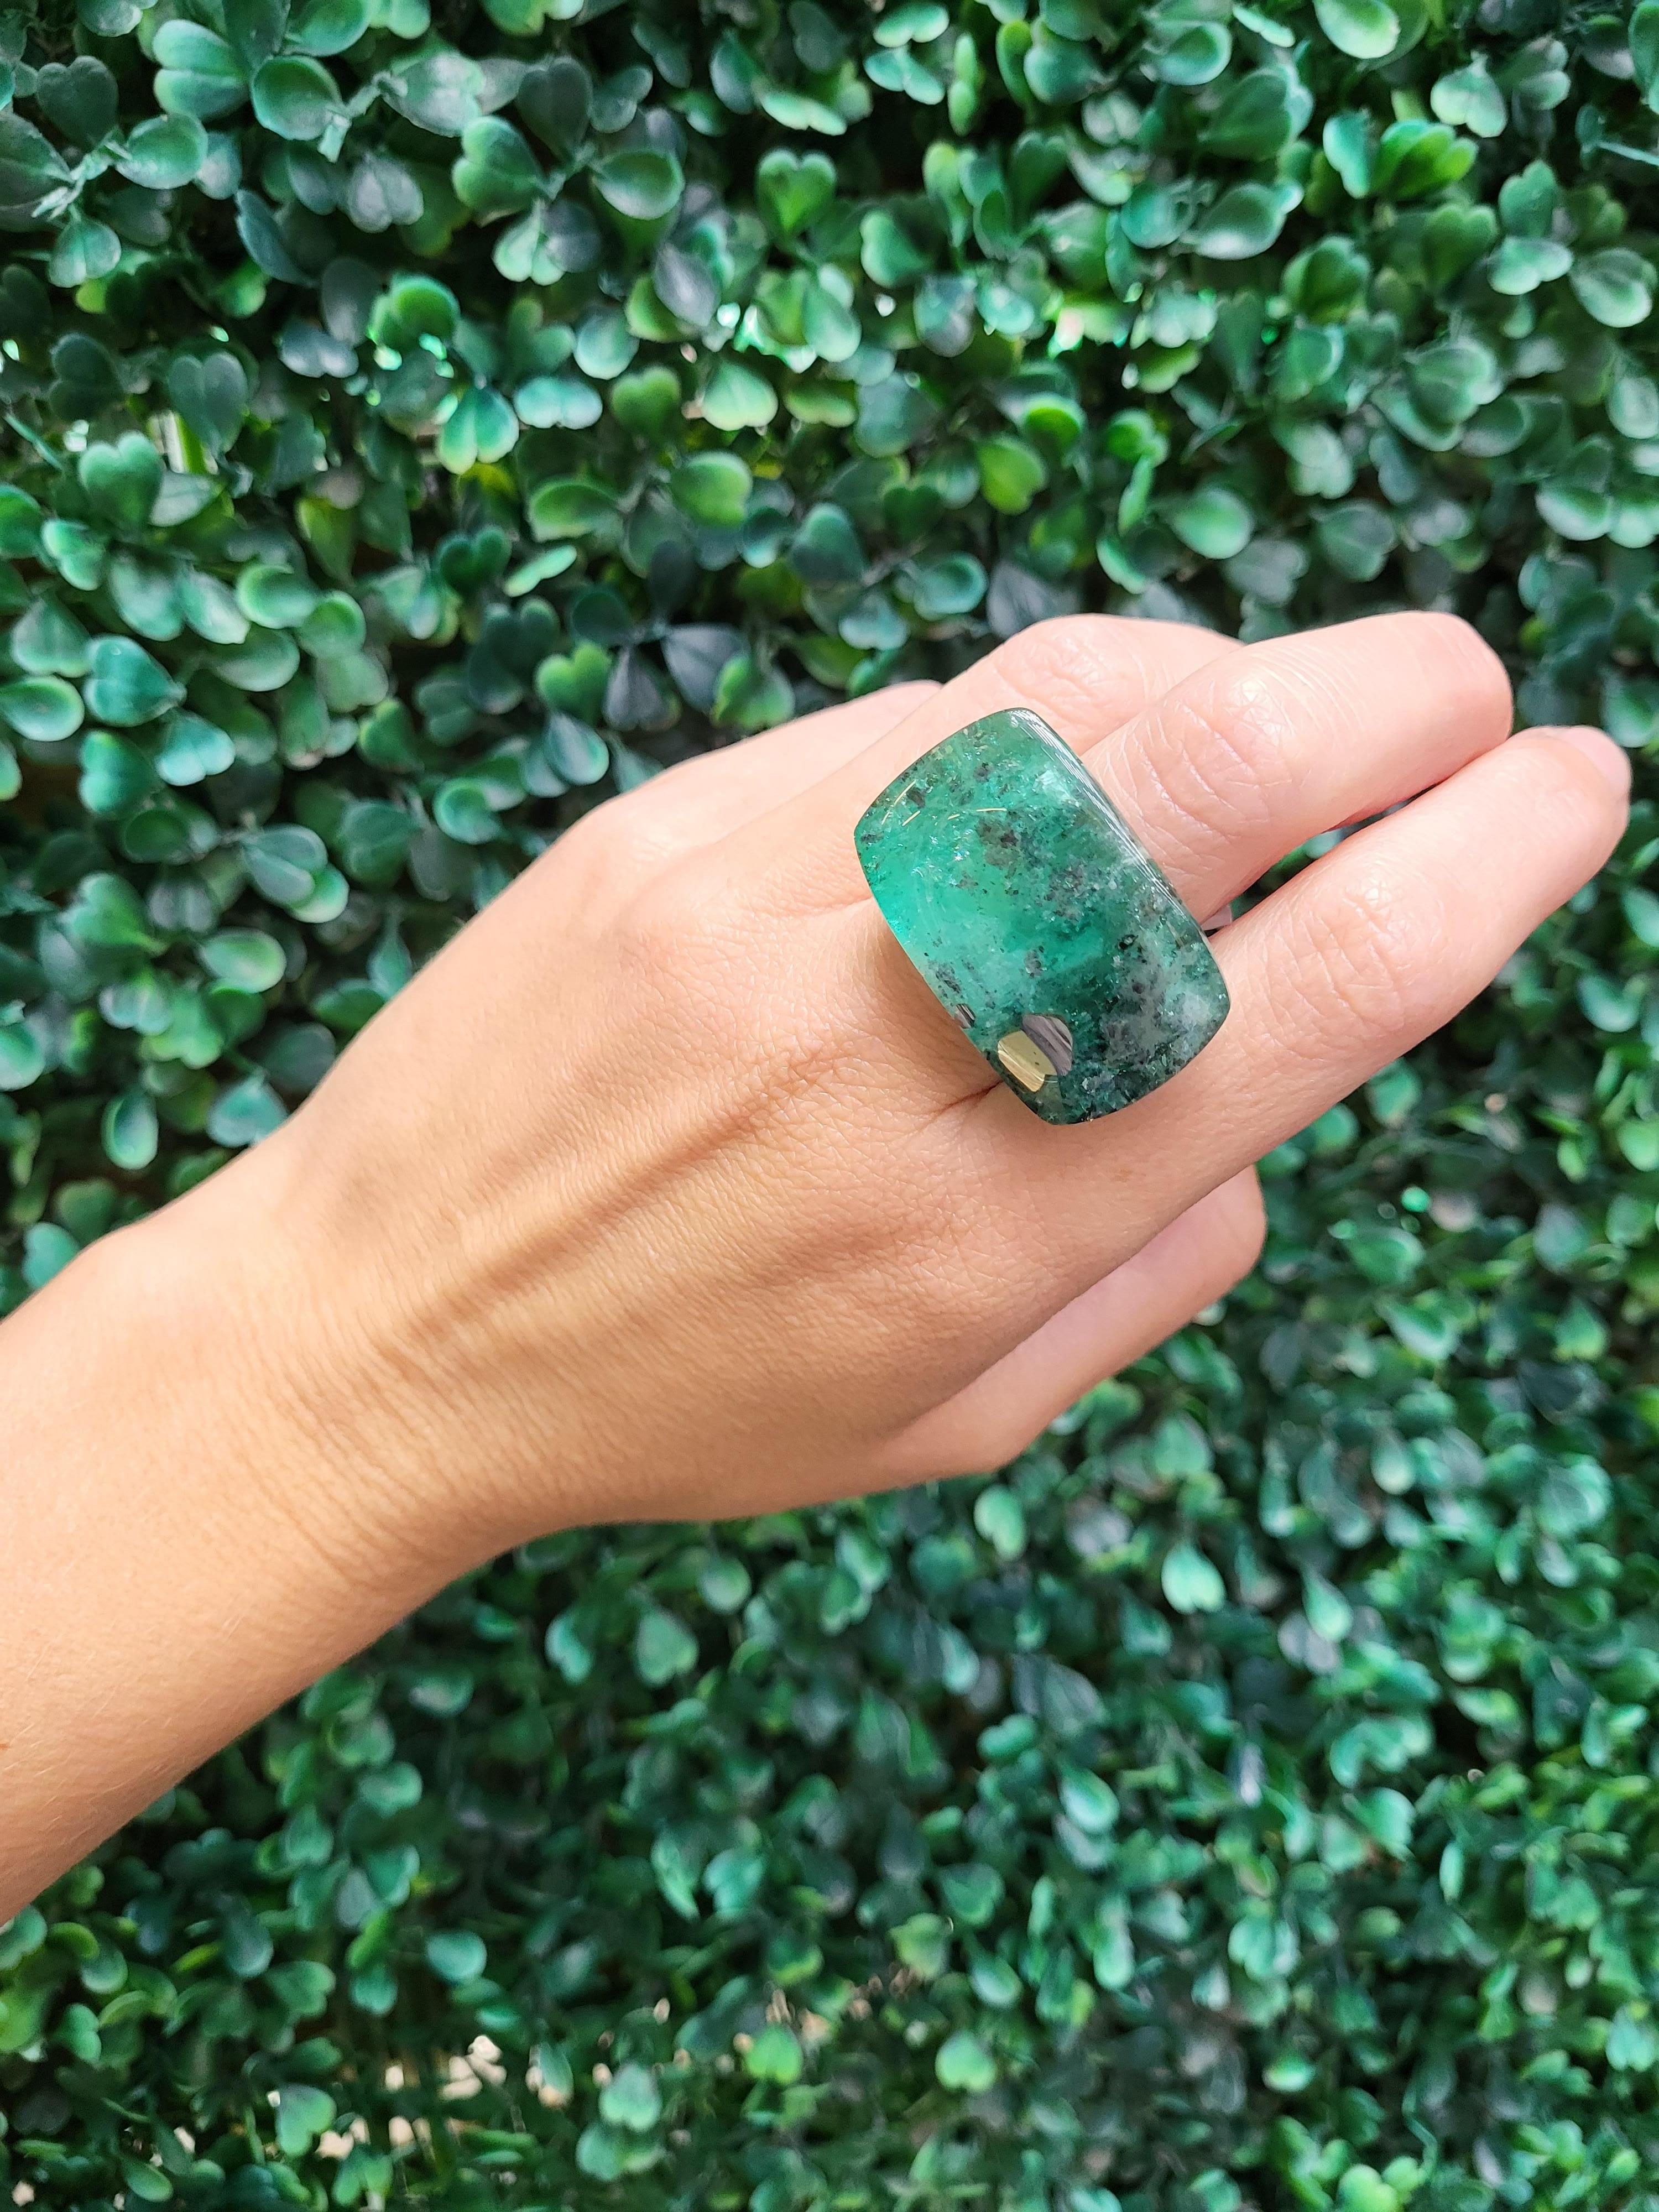 30 Carat Columbian Emerald Ring with Pyrite Inclusion For Sale 3